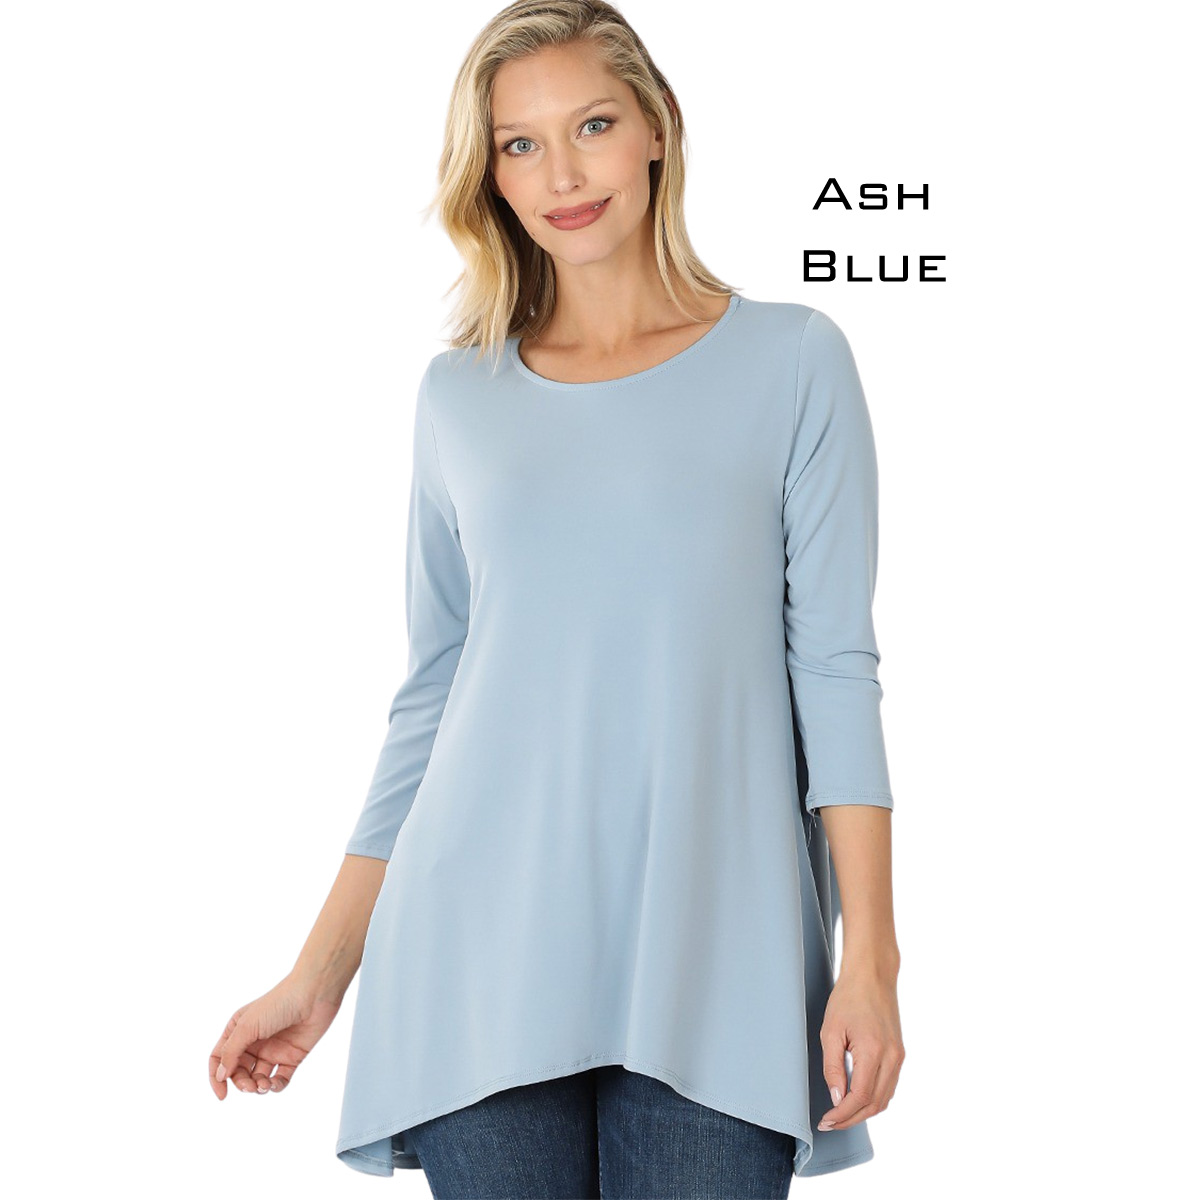 ASH BLUE Ity High-Low 3/4 Sleeve Top 2367